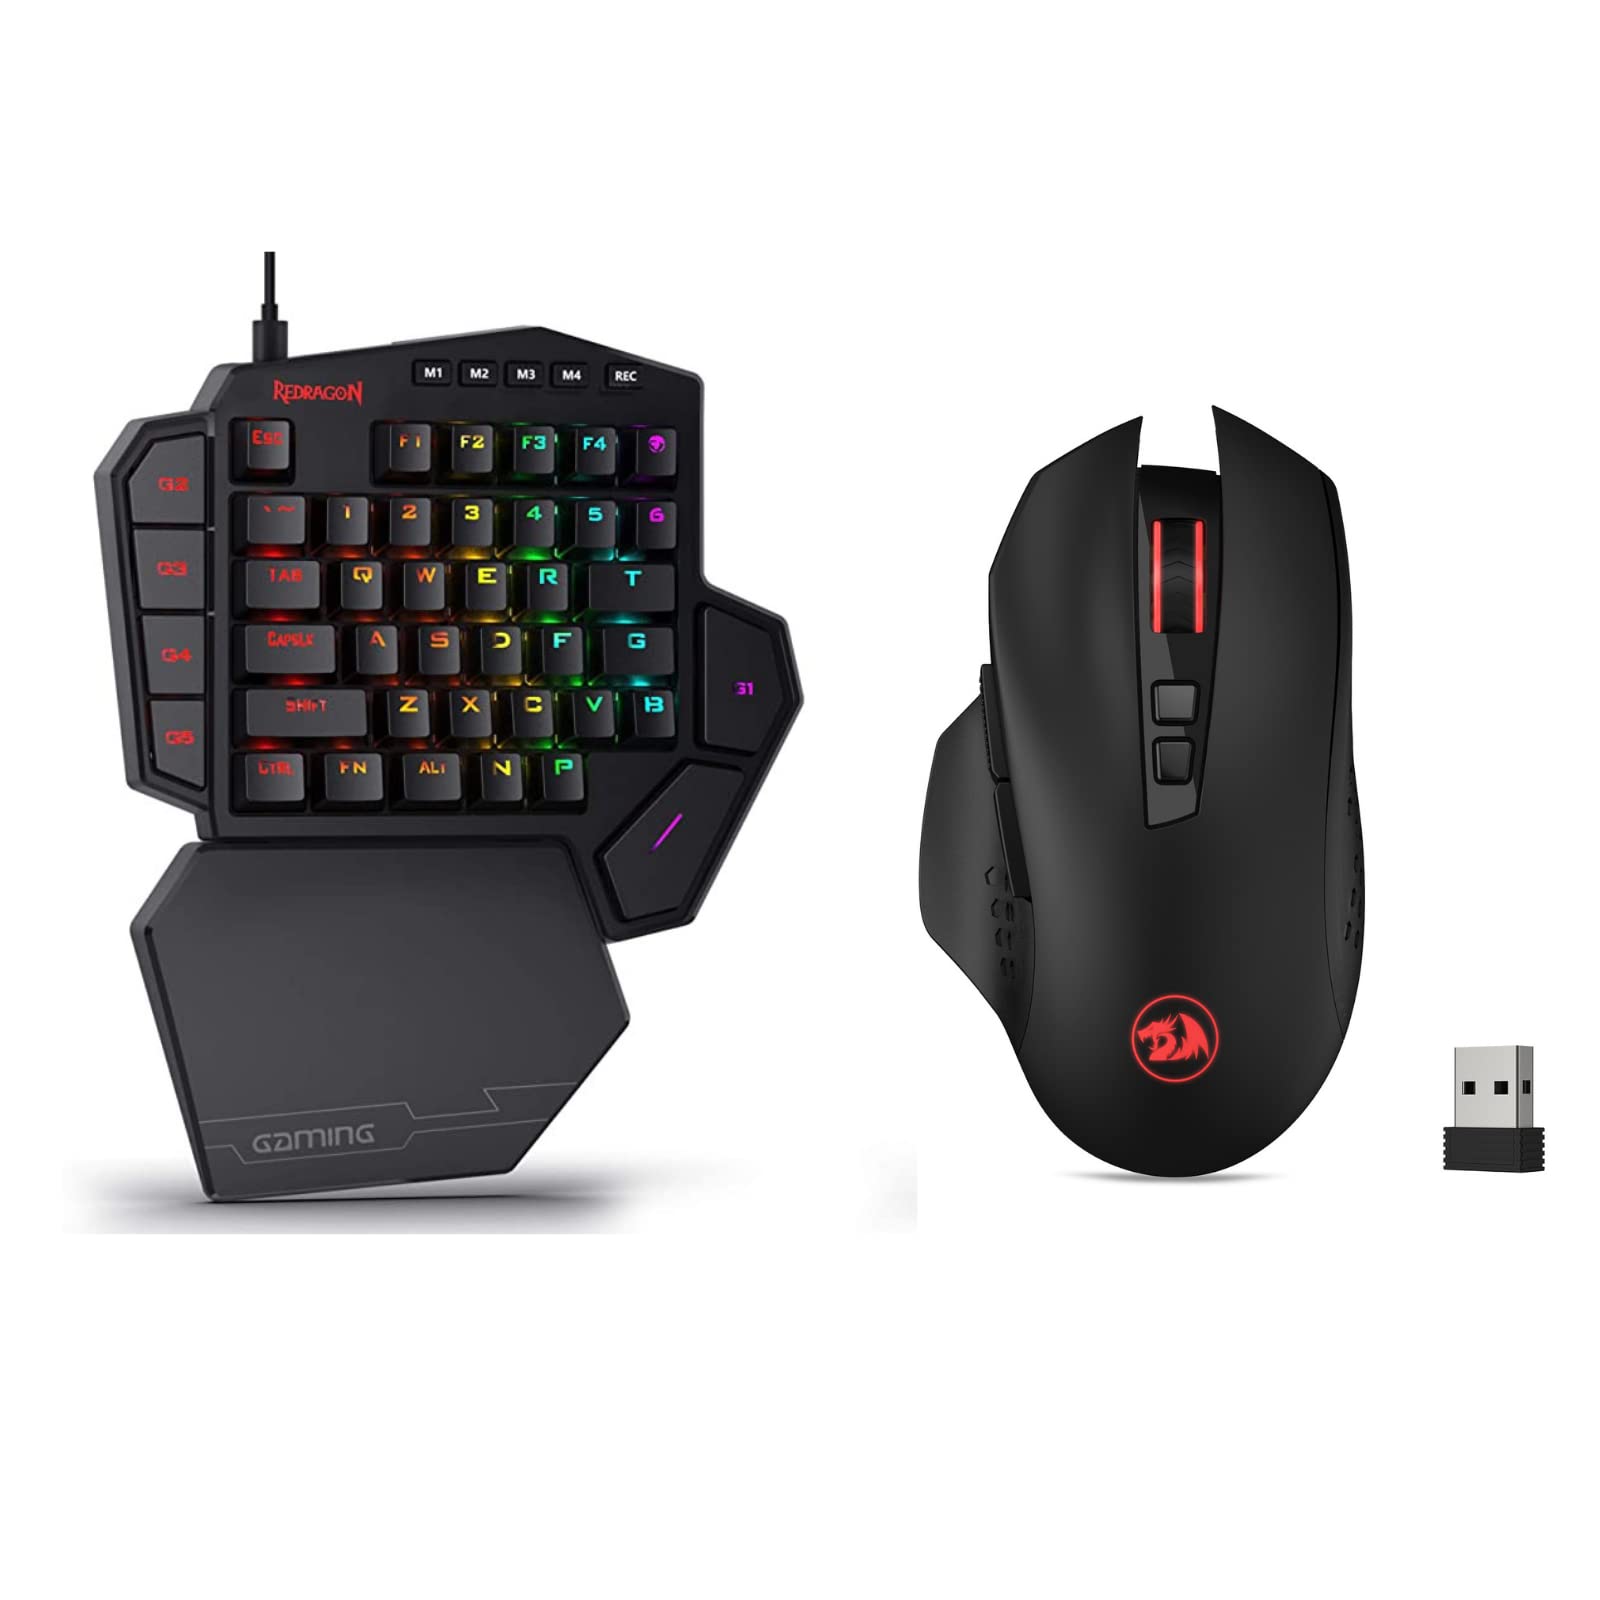 Redragon K585 One-Handed Keyboard and M656 Gainer Wireless Gaming Mouse Bundle